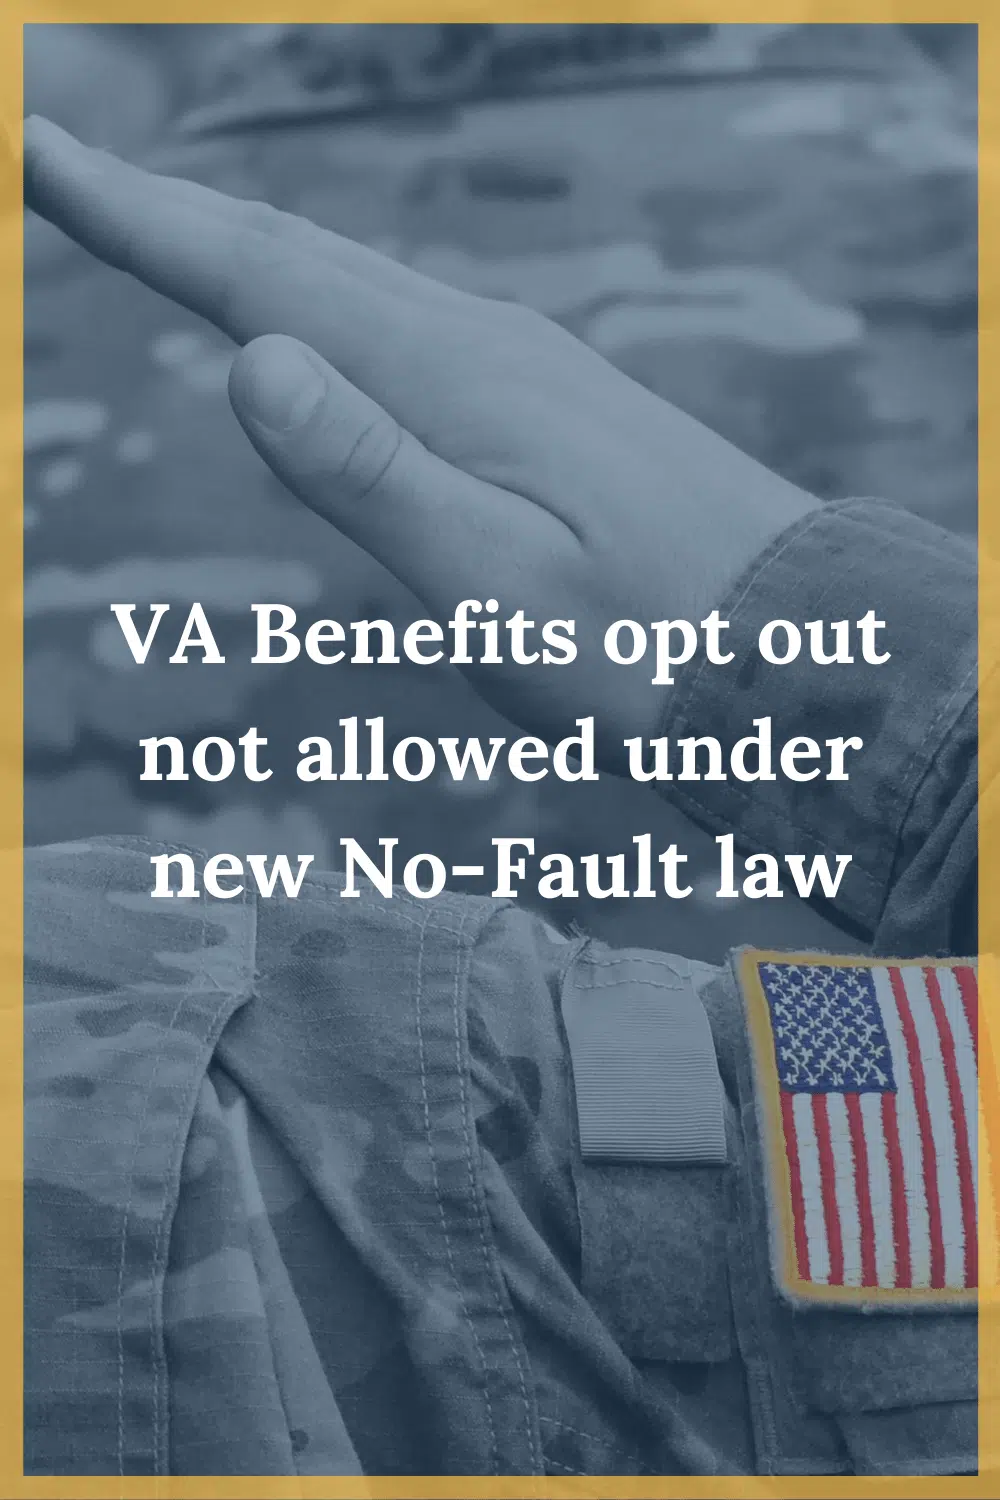 VA Benefits Opt Out Not Allowed Under New No-Fault Law